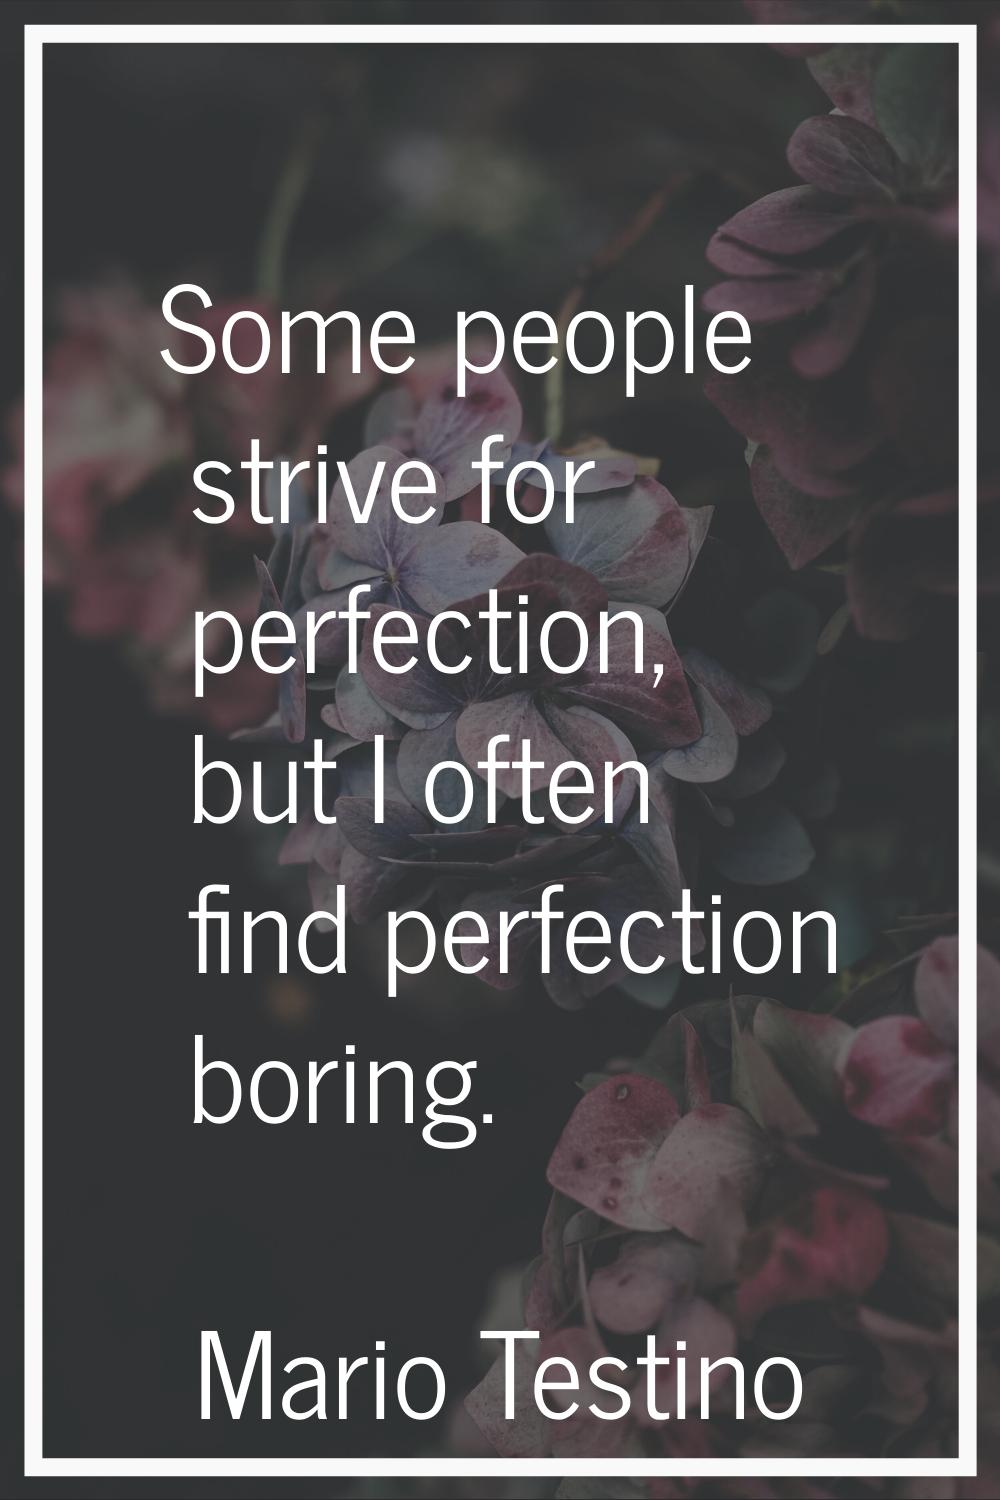 Some people strive for perfection, but I often find perfection boring.